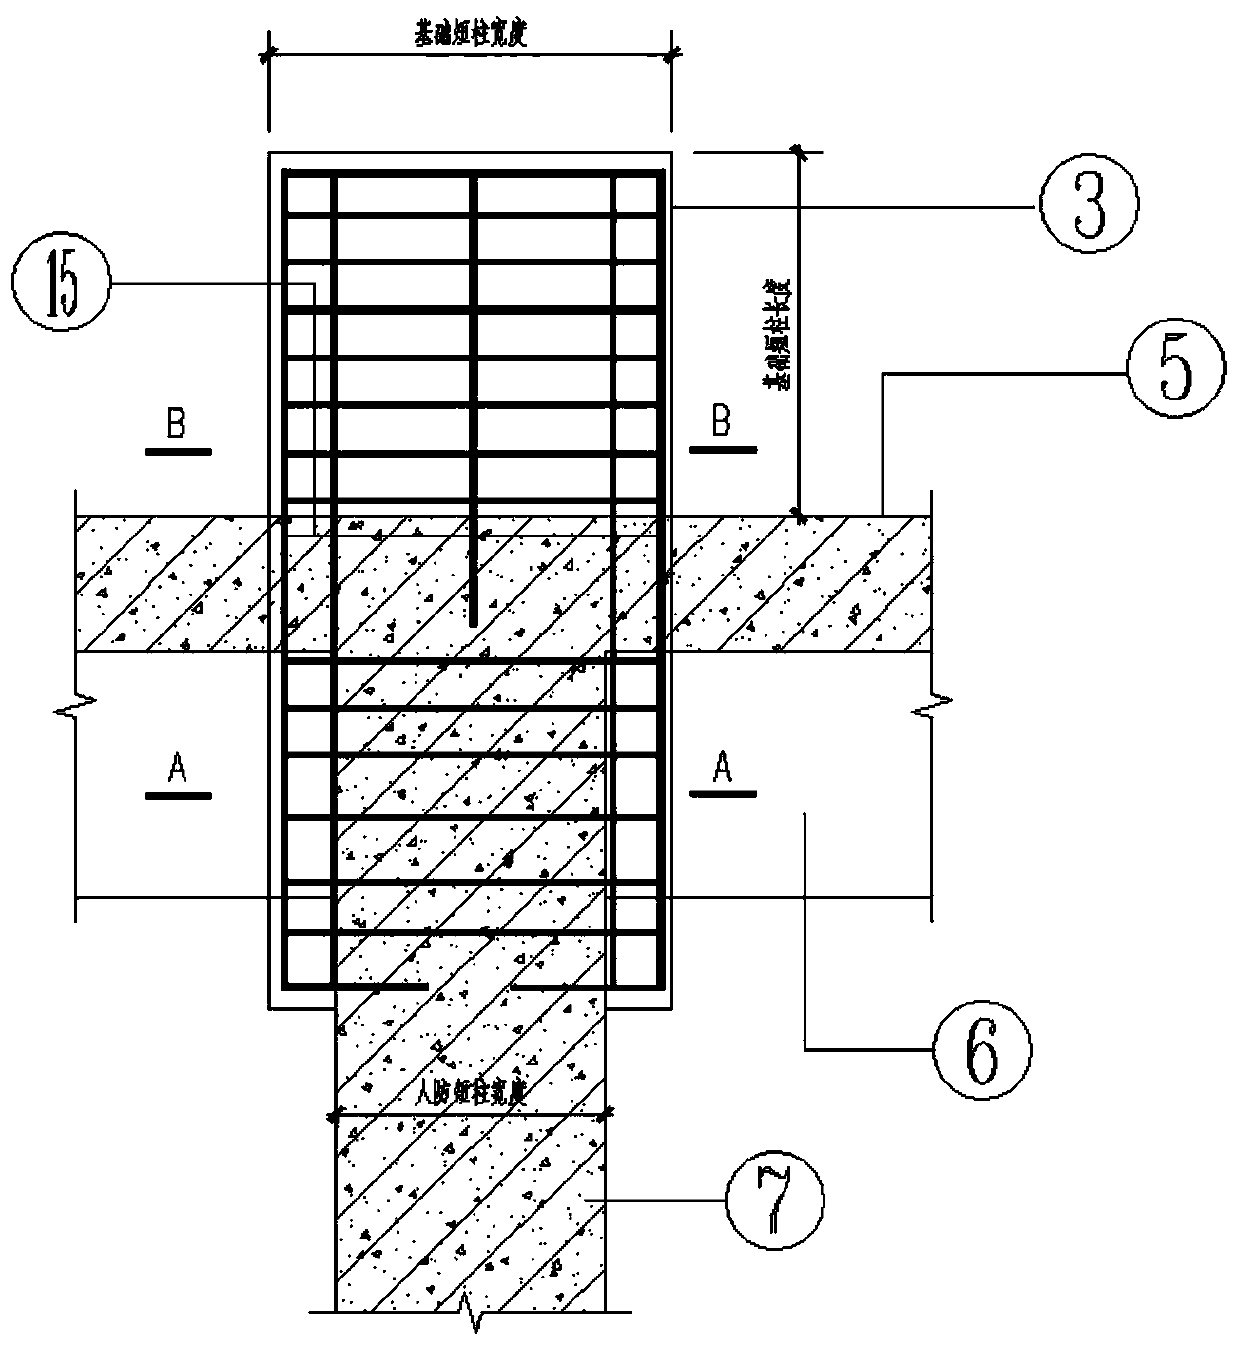 Hinged column foot structure utilizing built civil air defense panel point and construction method